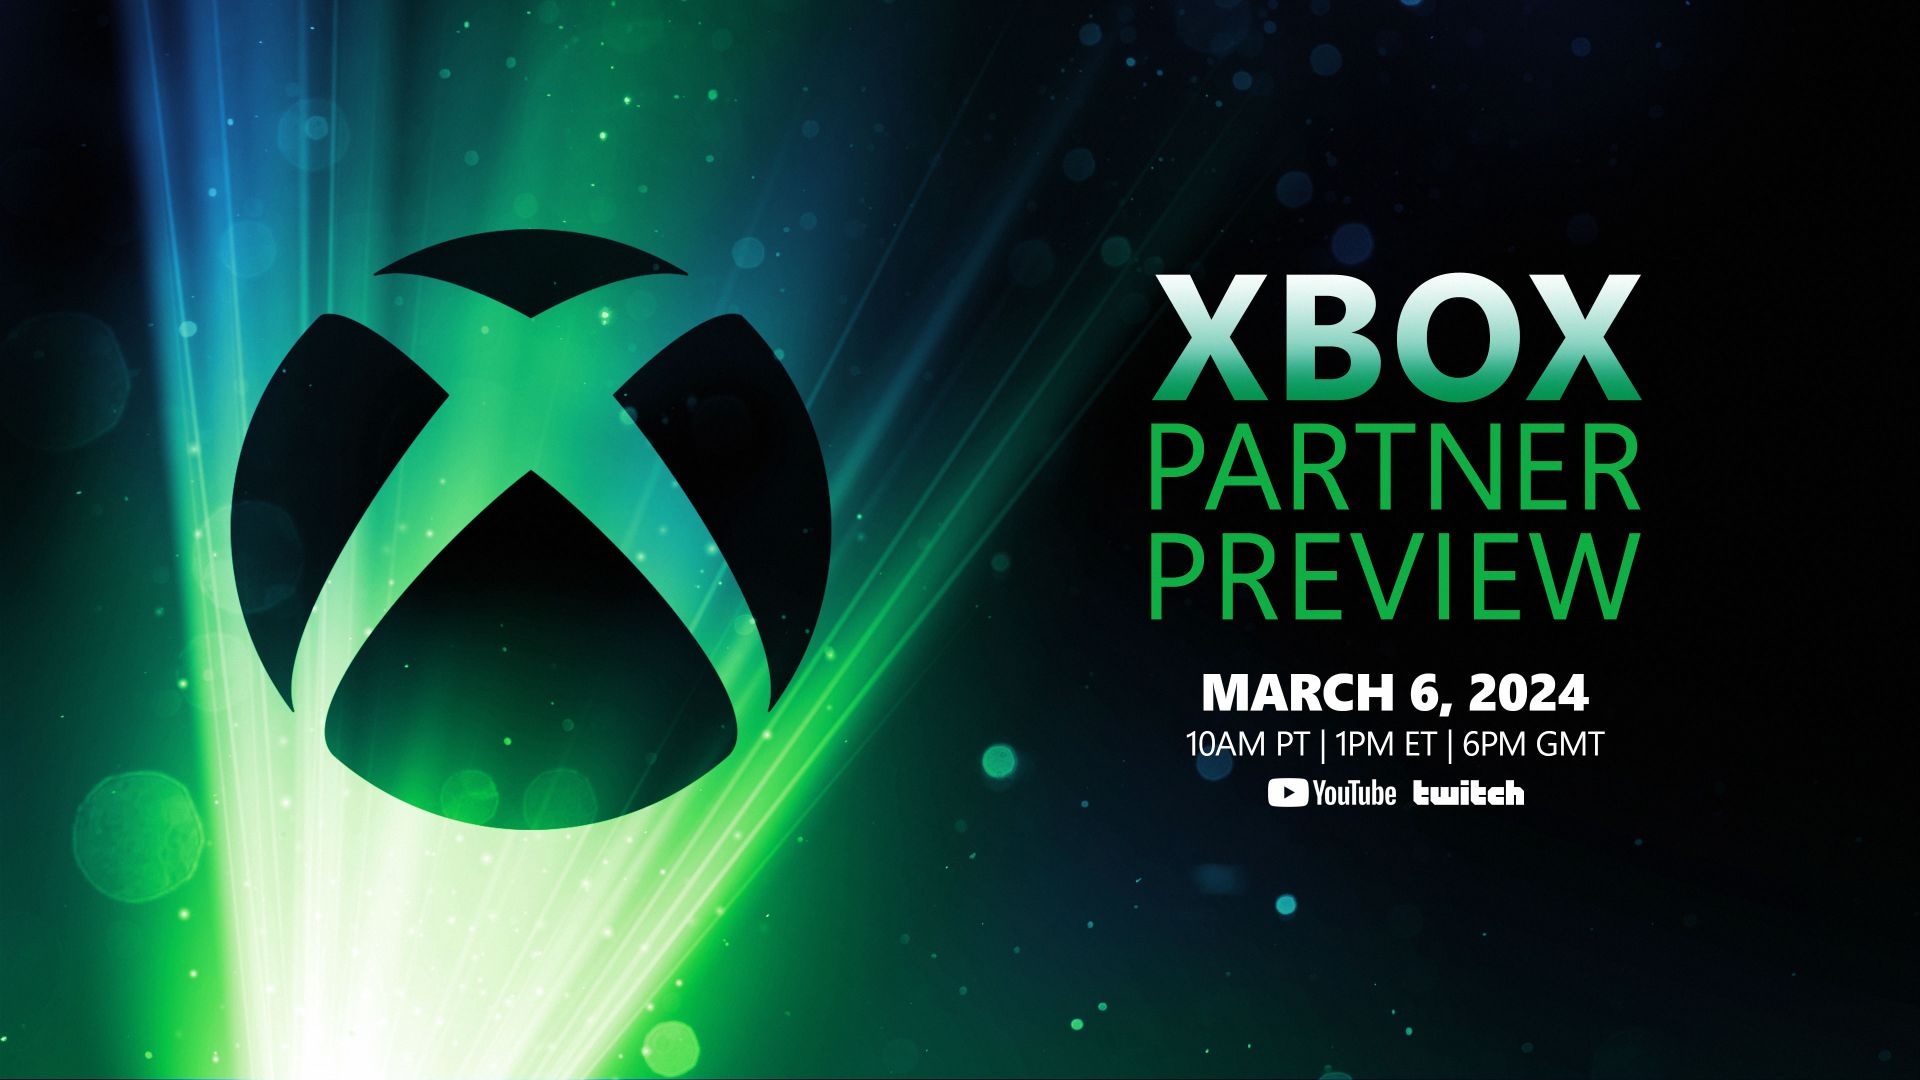 Microsoft will stream an Xbox Partner Preview event this week | VGC